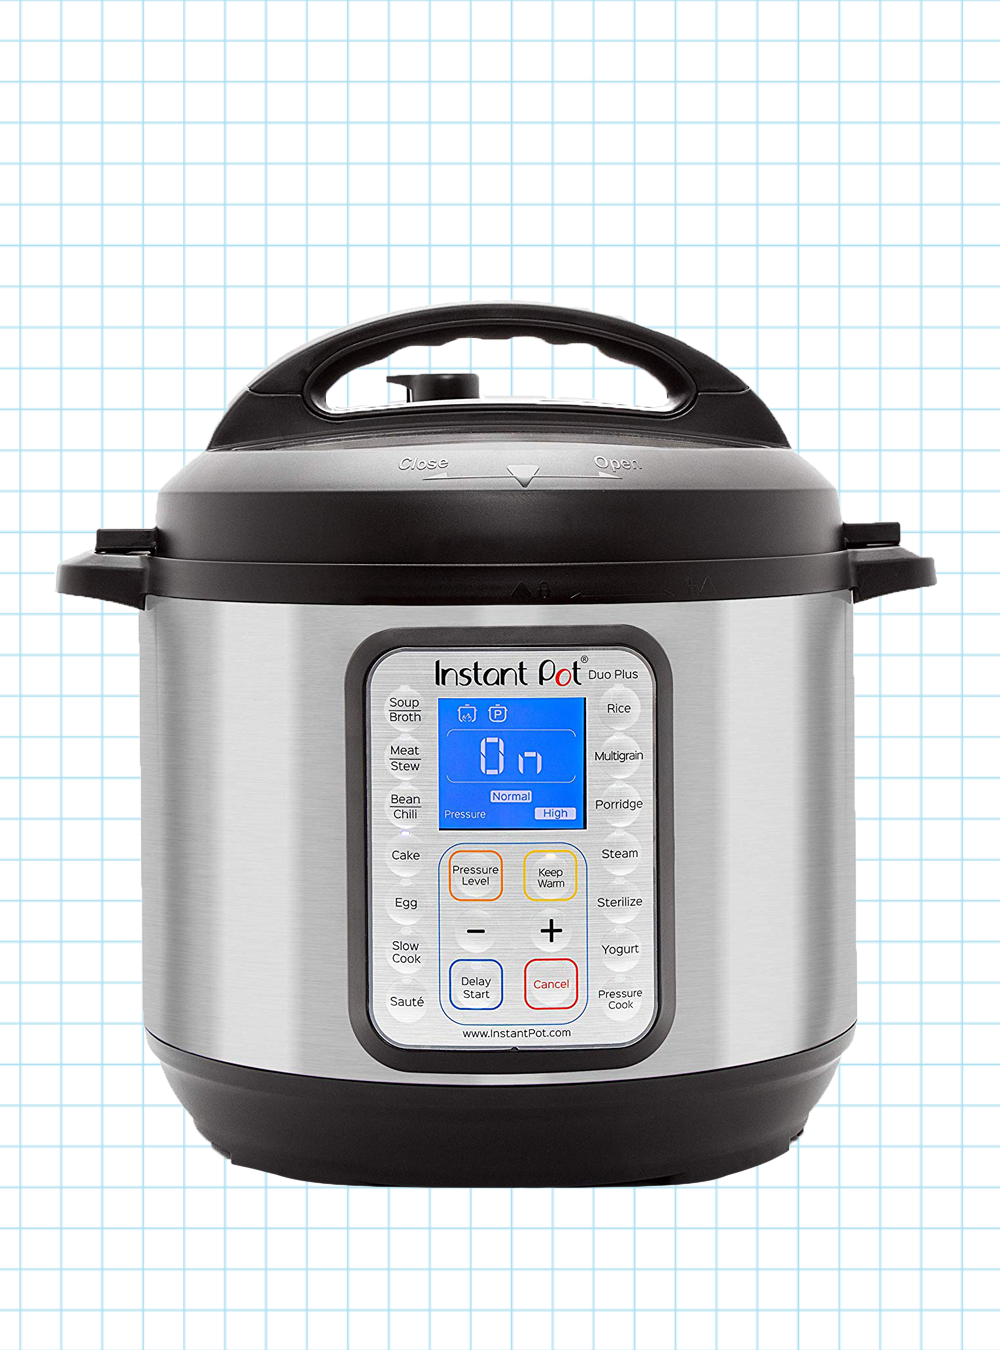 Instant pot duo plus recipe book, donkeytime.org